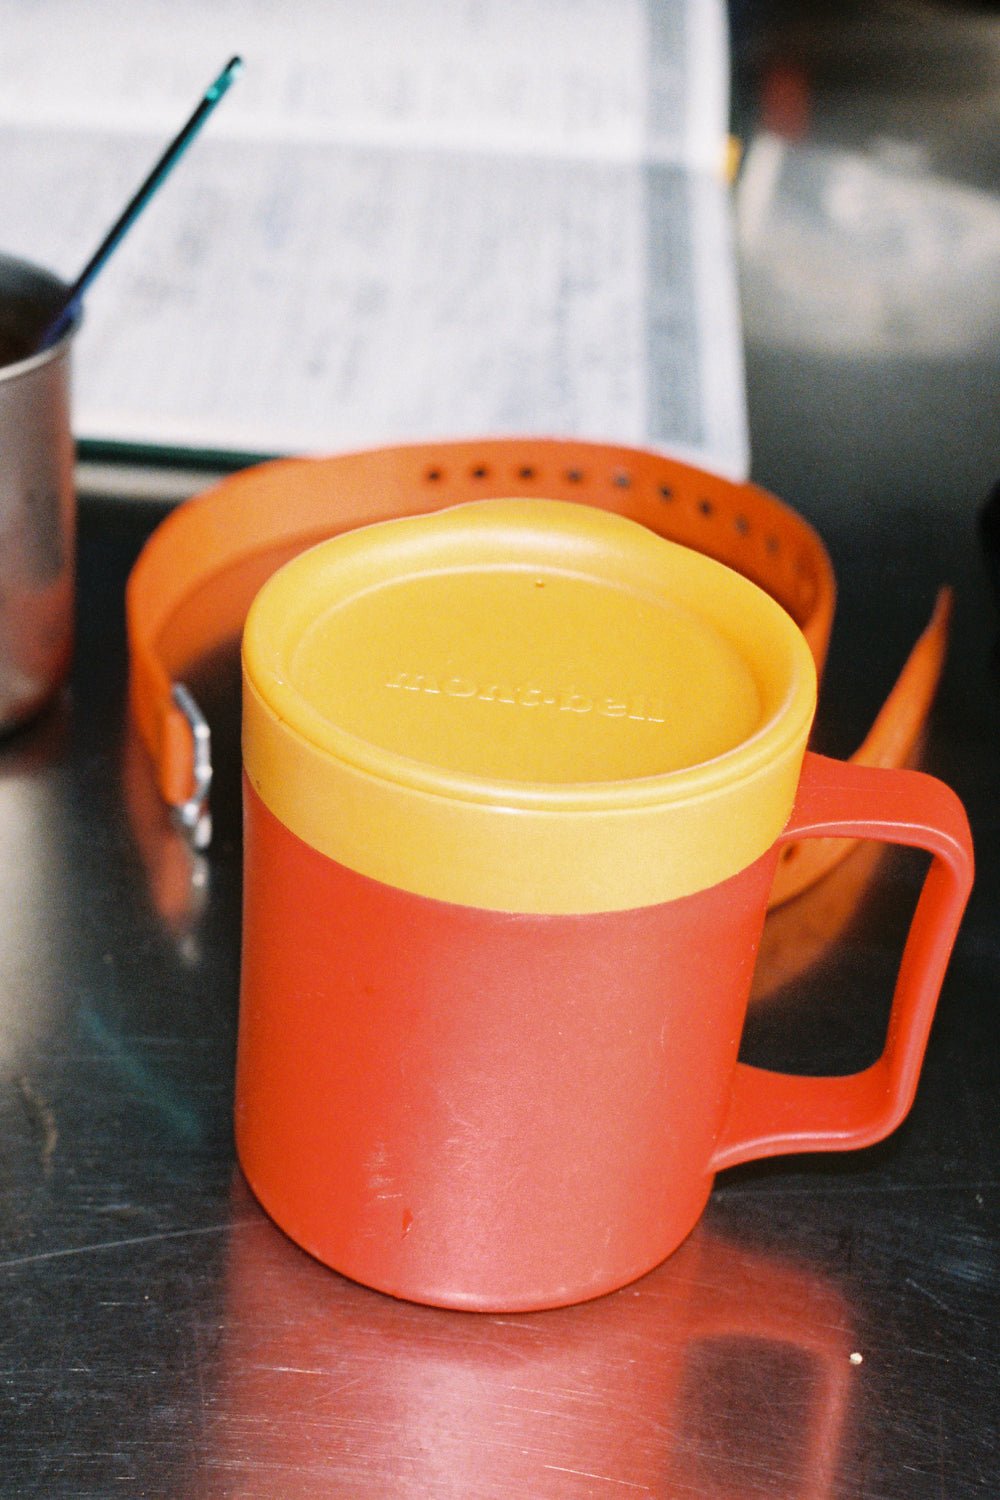 Montbell Thermo Mug 200  - Sunset Orange | Coffee Outdoors